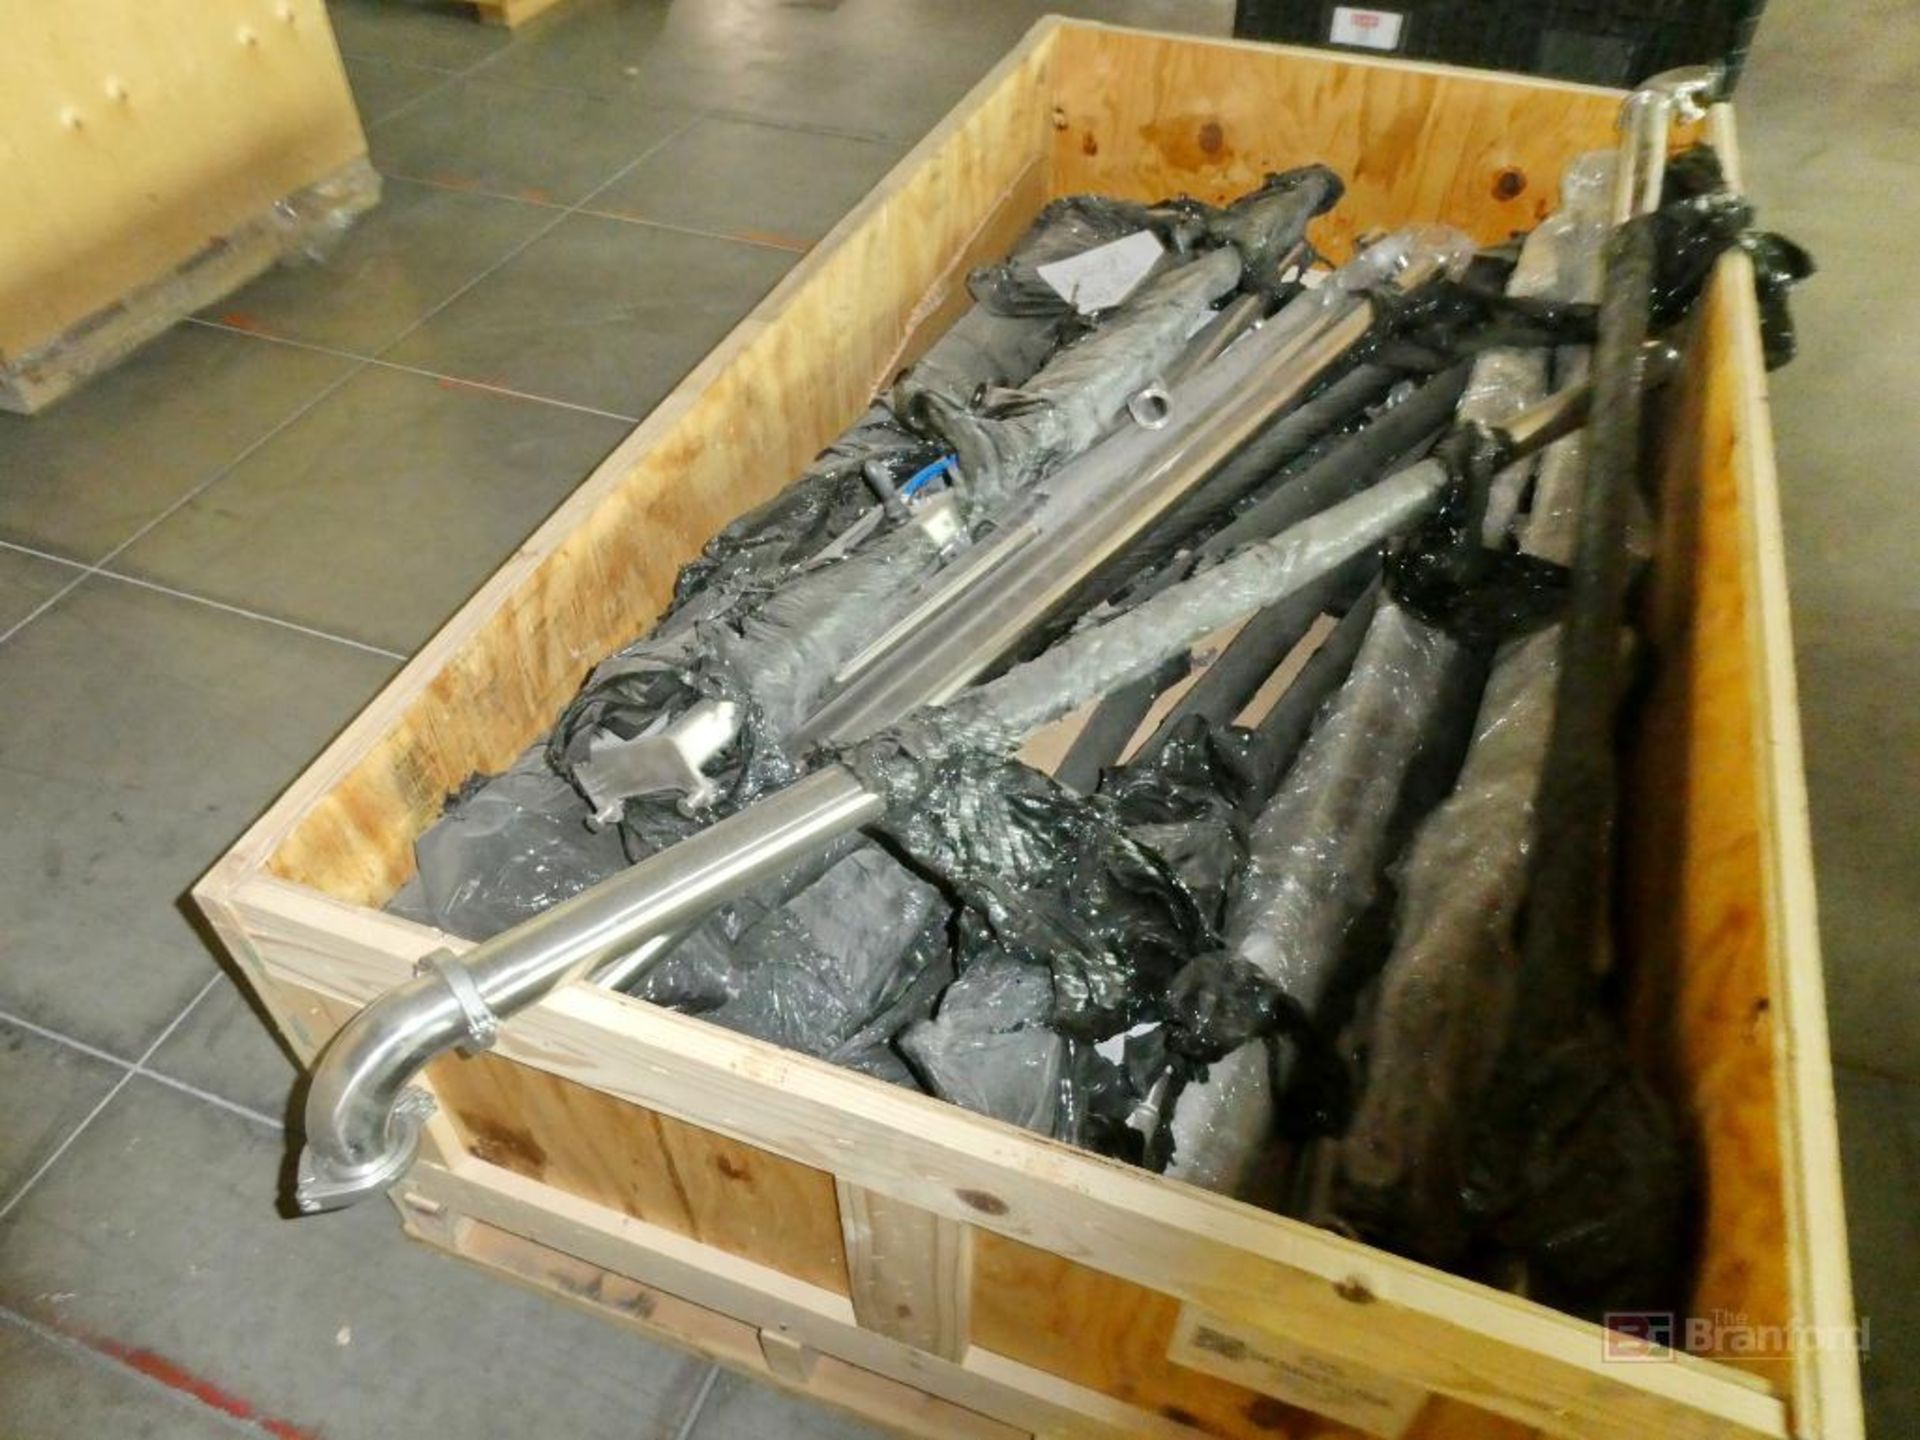 Crate of Stainless Steel Spare Piping for the Depositors (New) - Image 2 of 2